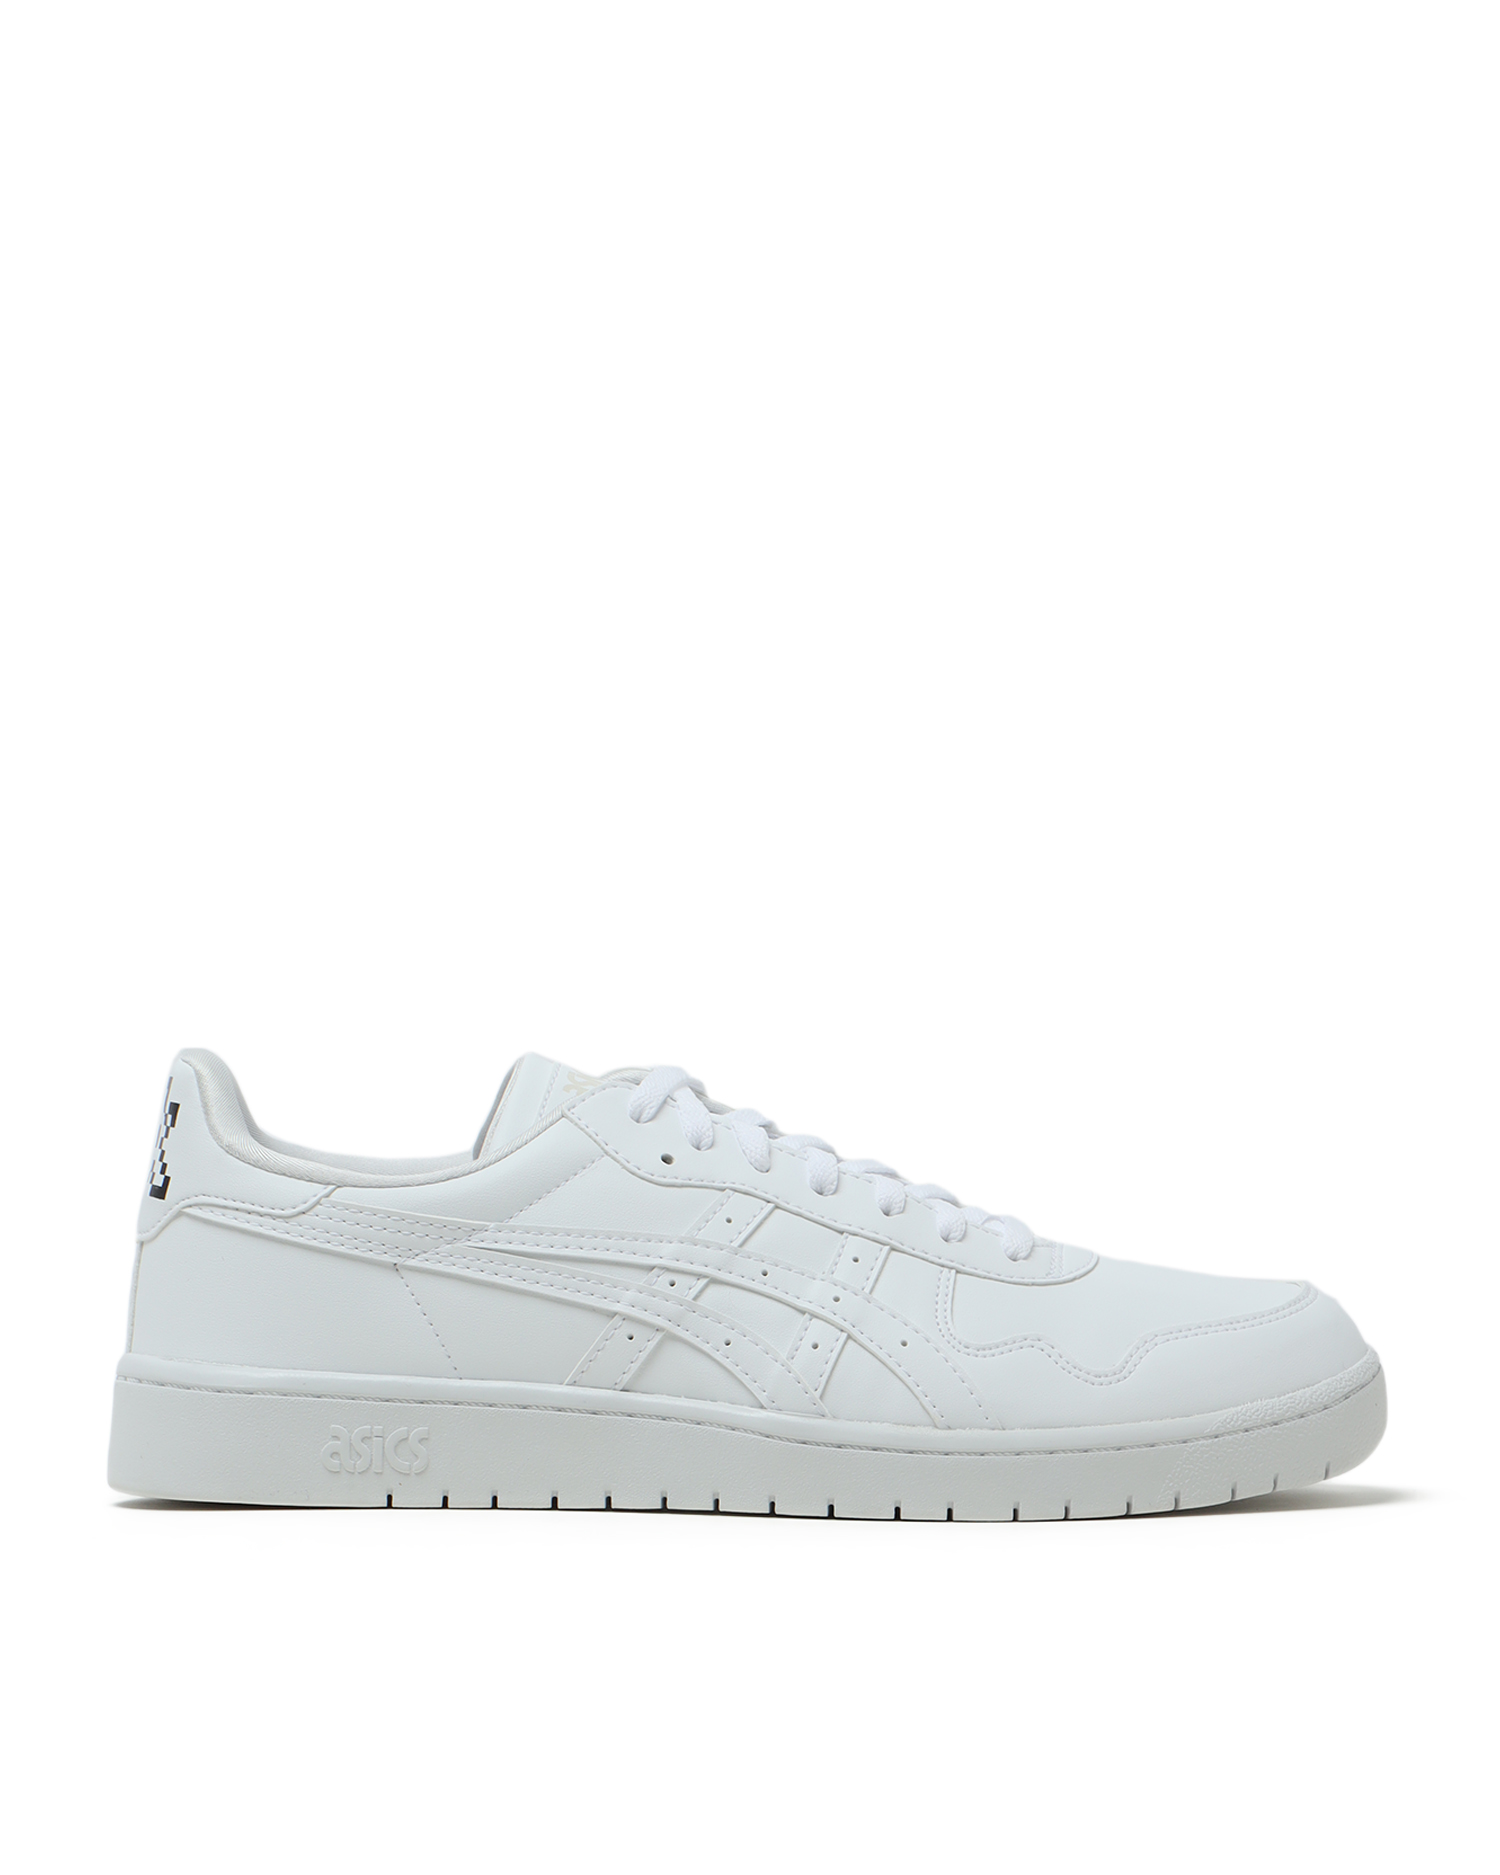 x asics x invader japan s sneakers